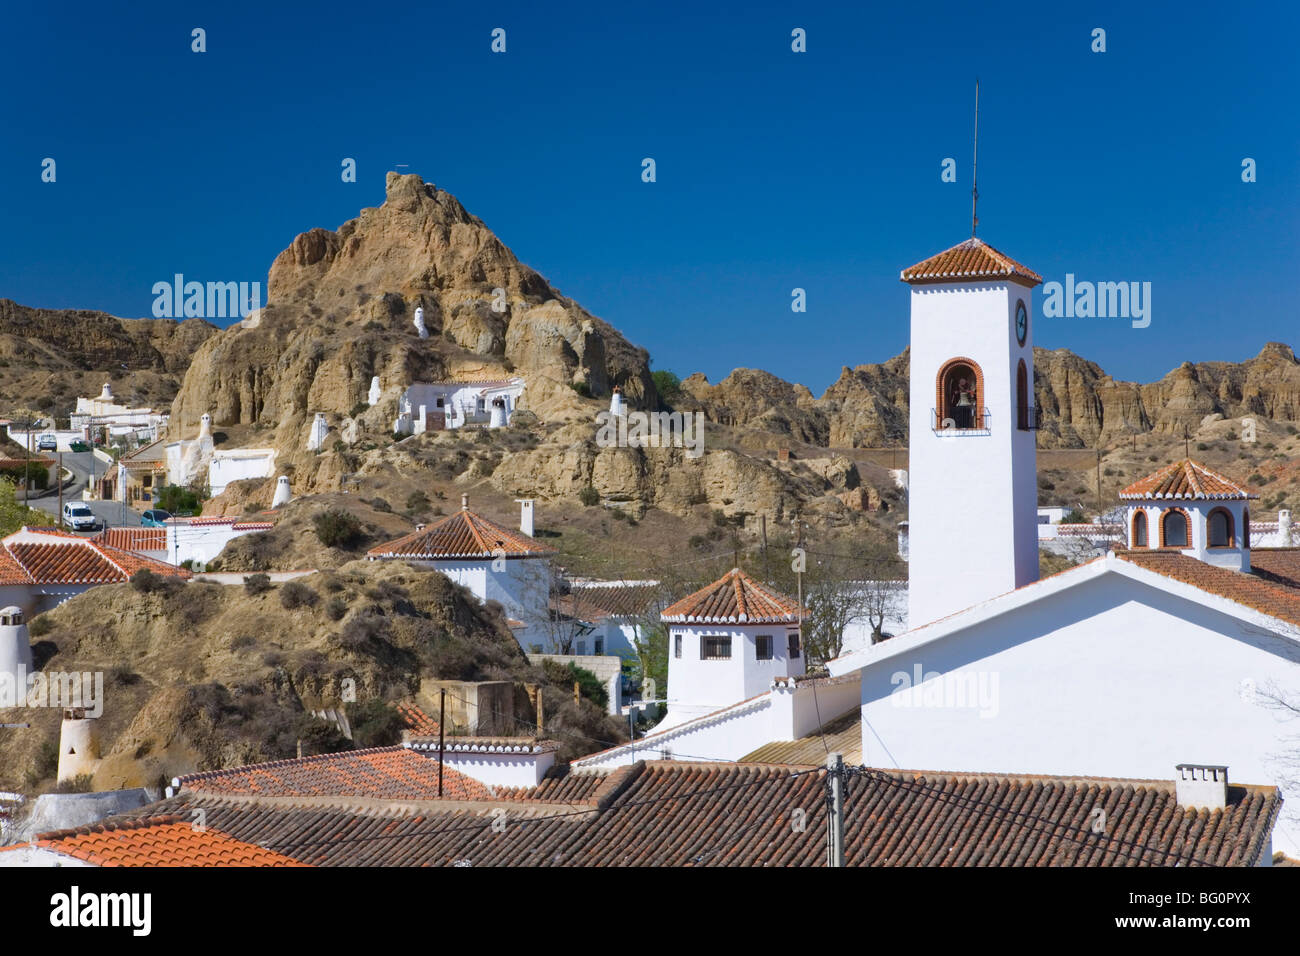 View across rooftops to cave houses in the troglodyte district, Guadix, Granada, Andalucia (Andalusia), Spain, Europe Stock Photo